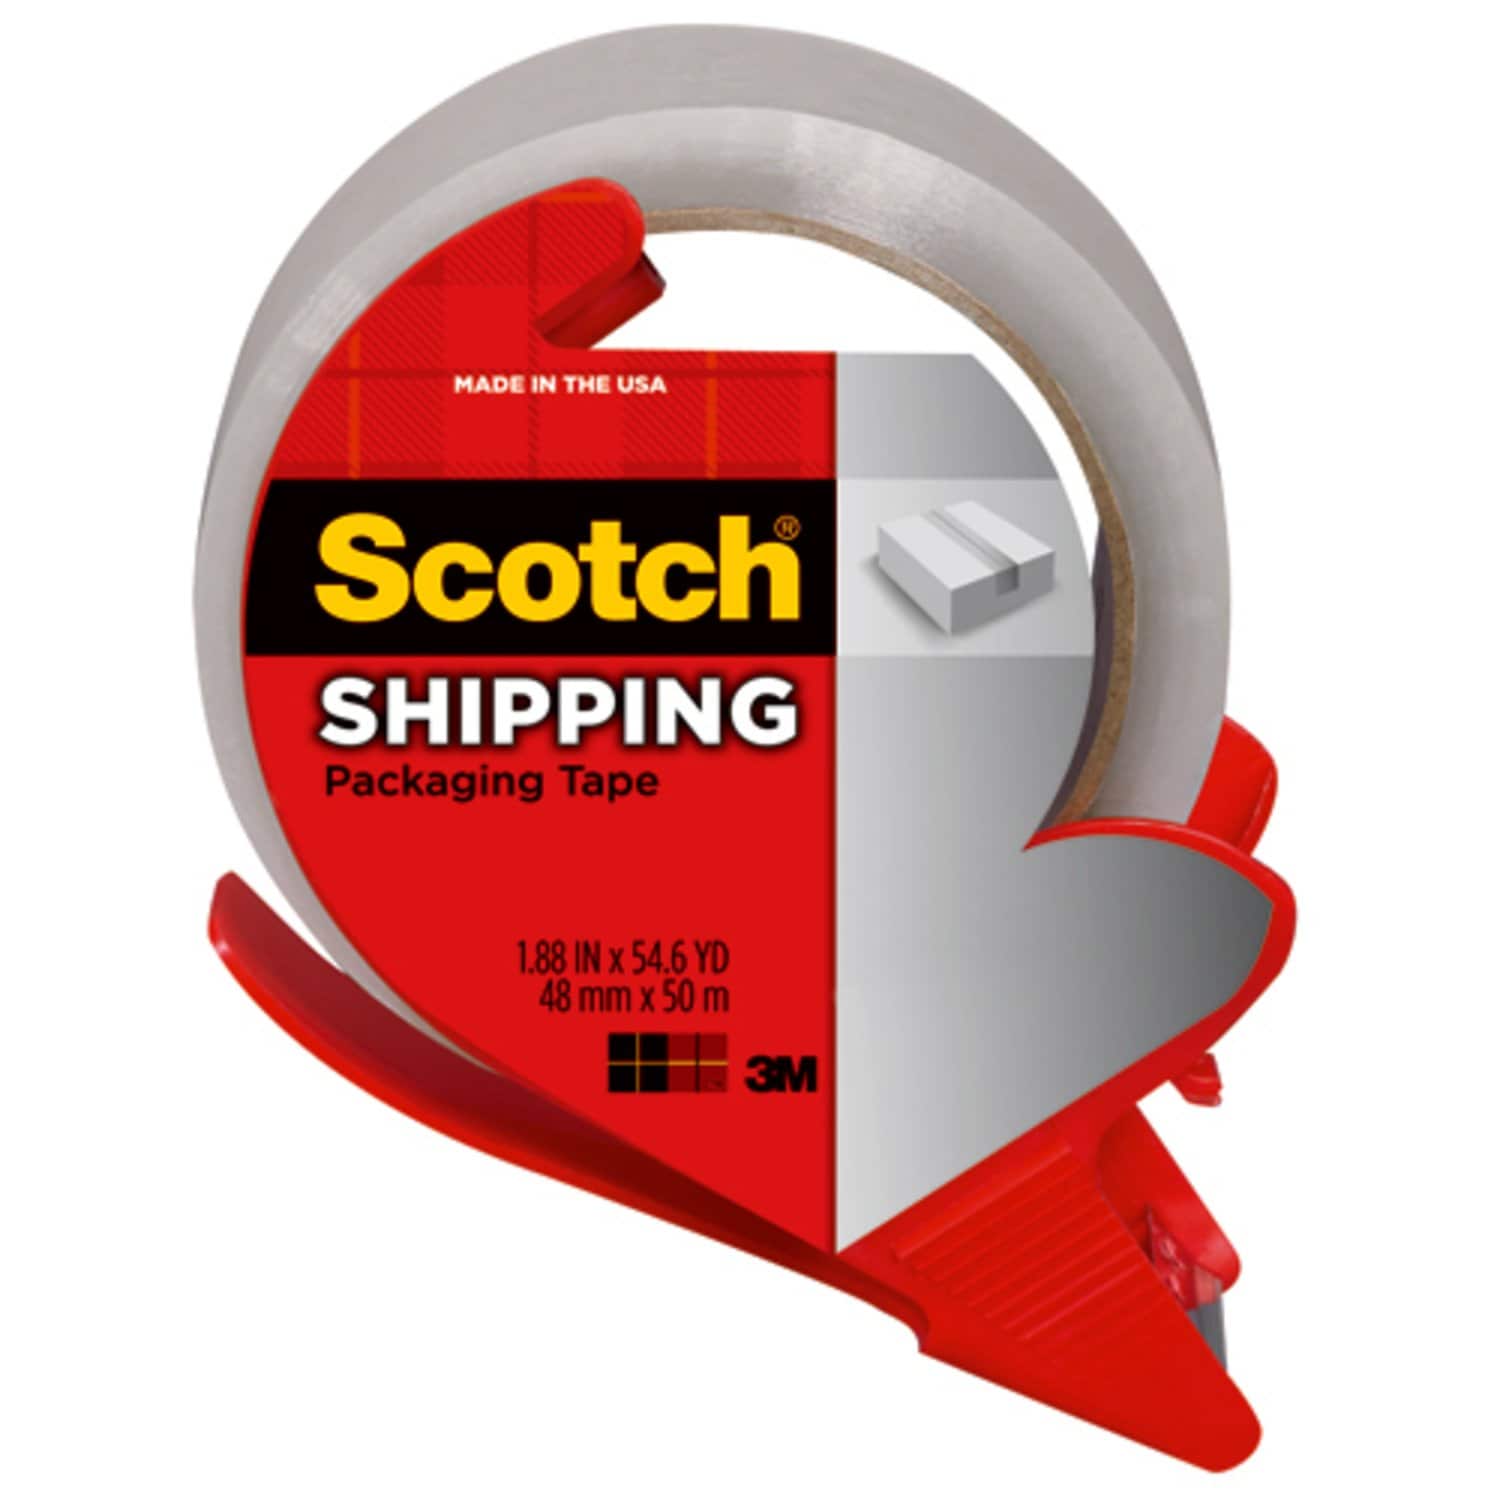 7100260549 - Scotch Shipping Packaging Tape 3350-77-RD36GC, 1.88 in x 84.2 yd (48 mm x 77 m)